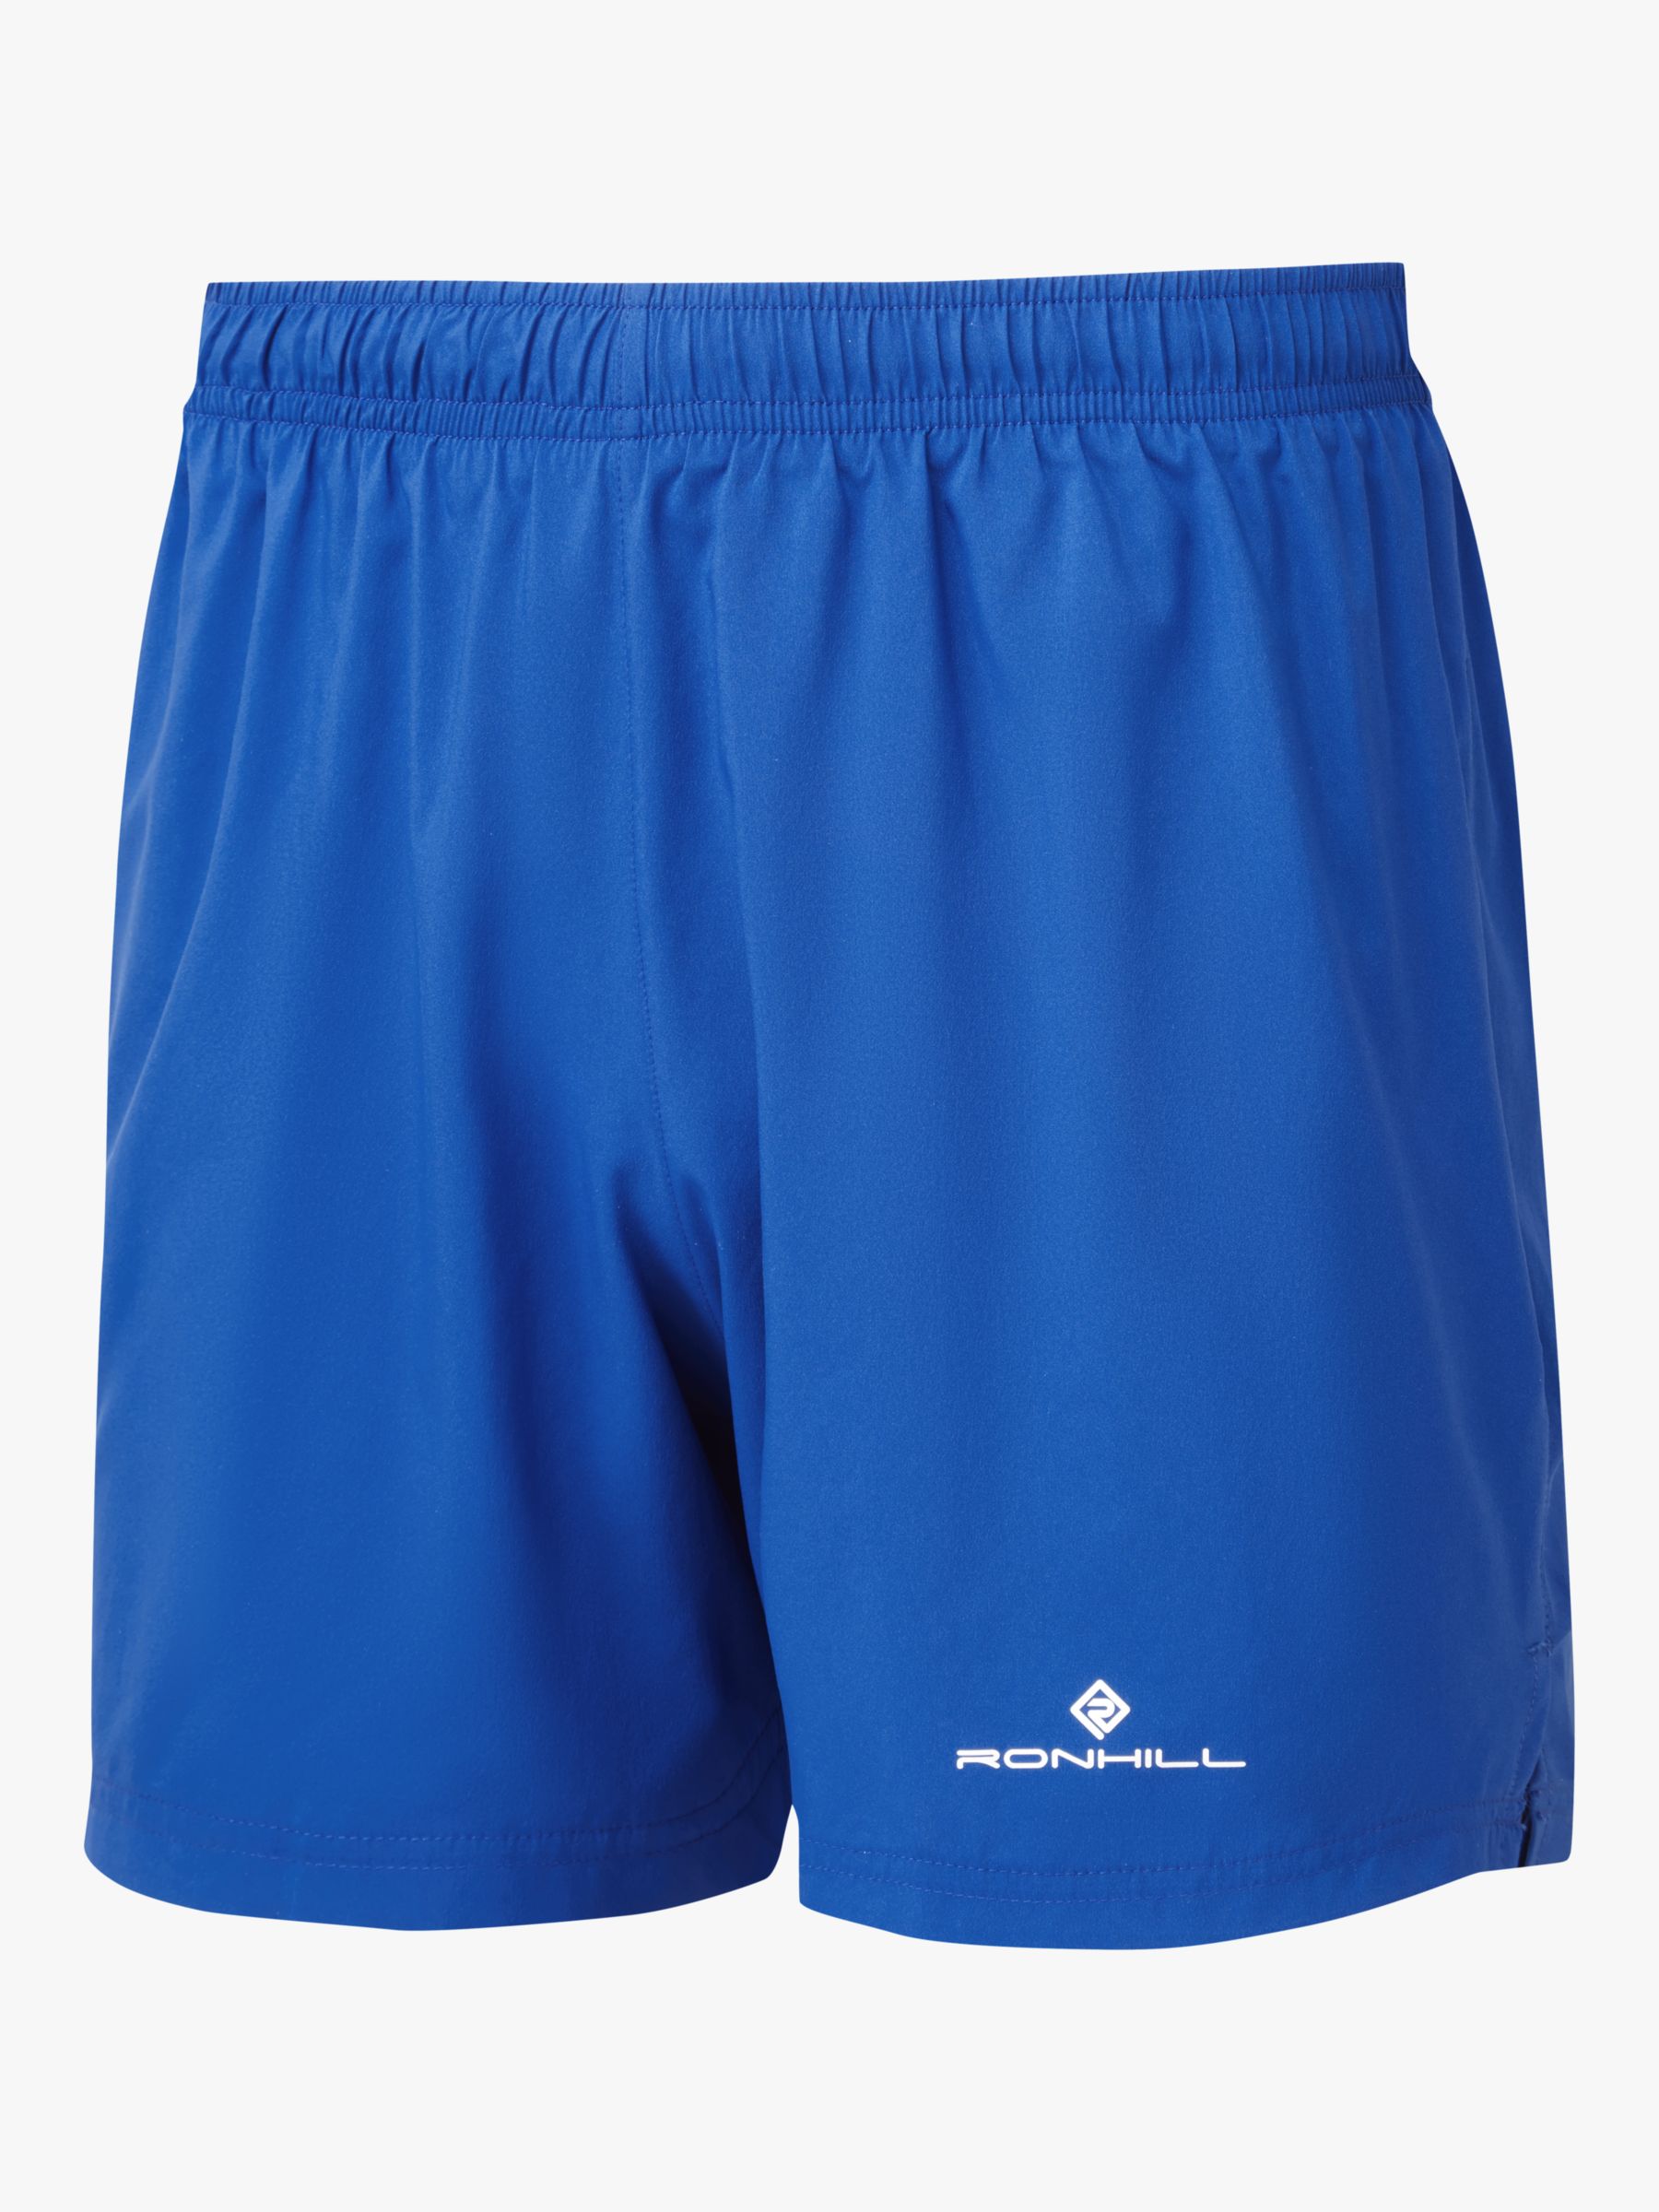 Ronhill Relaxed 5 inch Shorts, Blue, XL